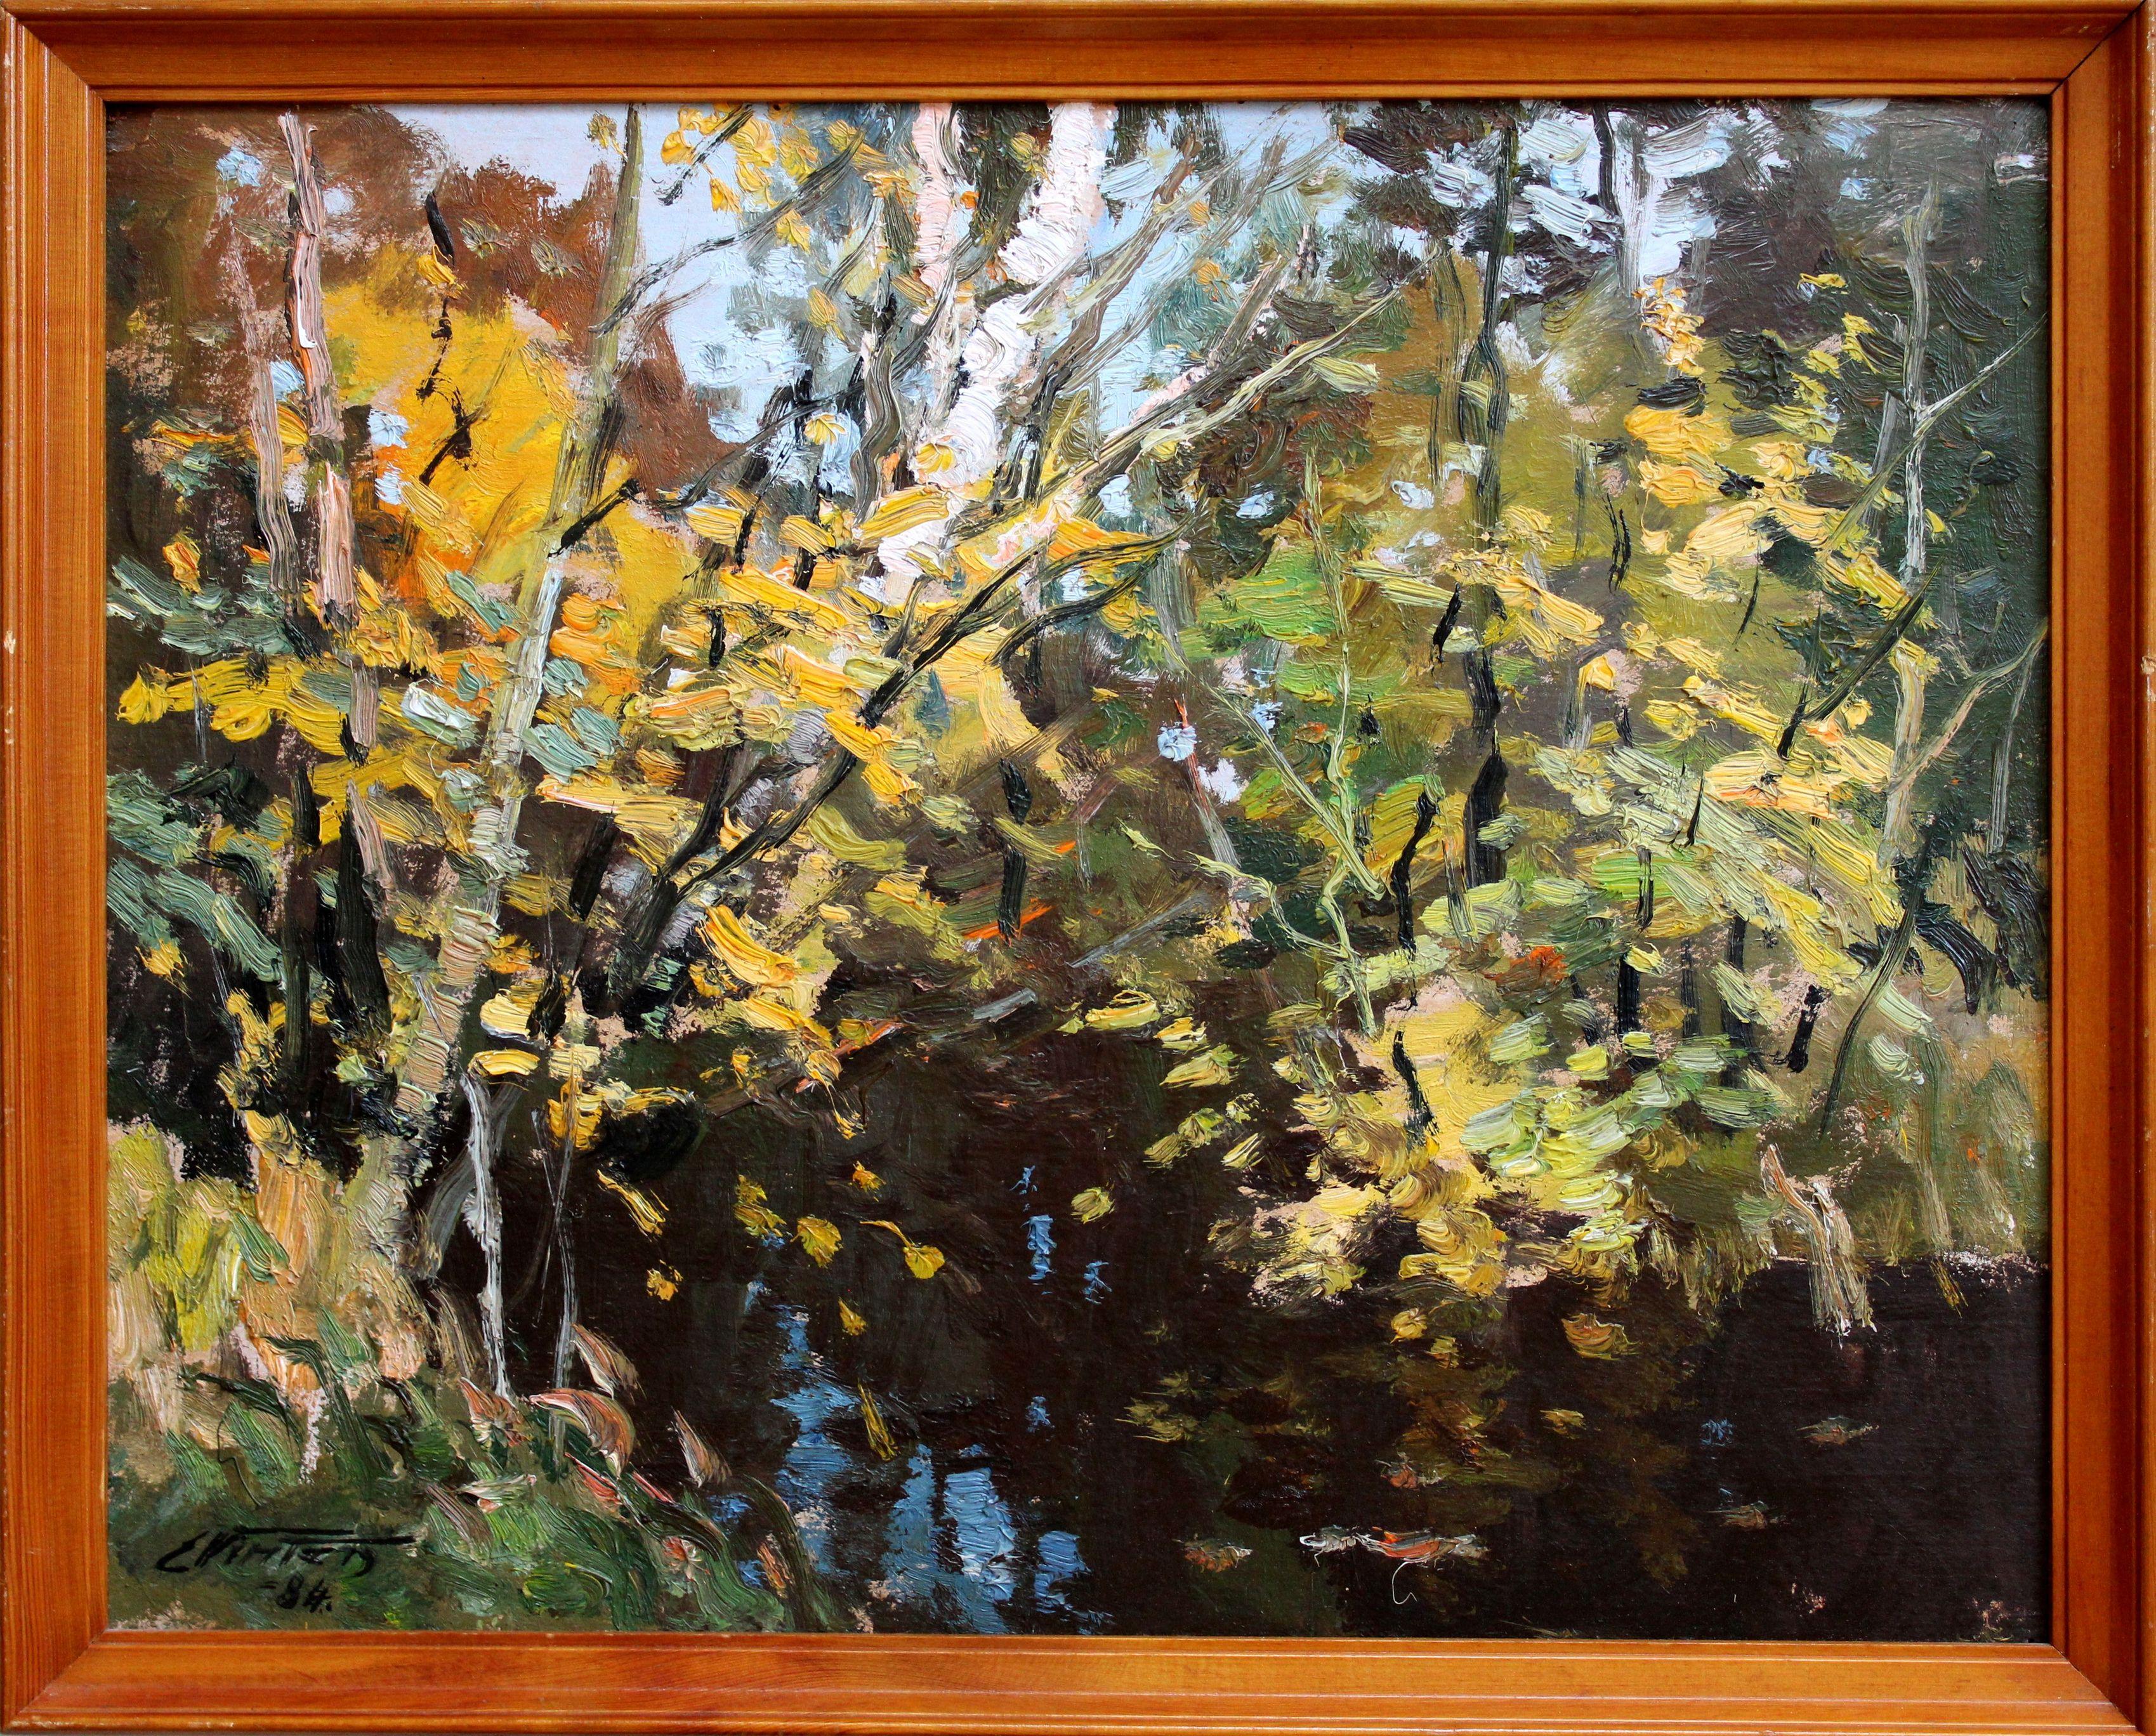 River in autumn. 1984, cardboard, oil, 40x50 cm - Impressionist Painting by Edgars Vinters